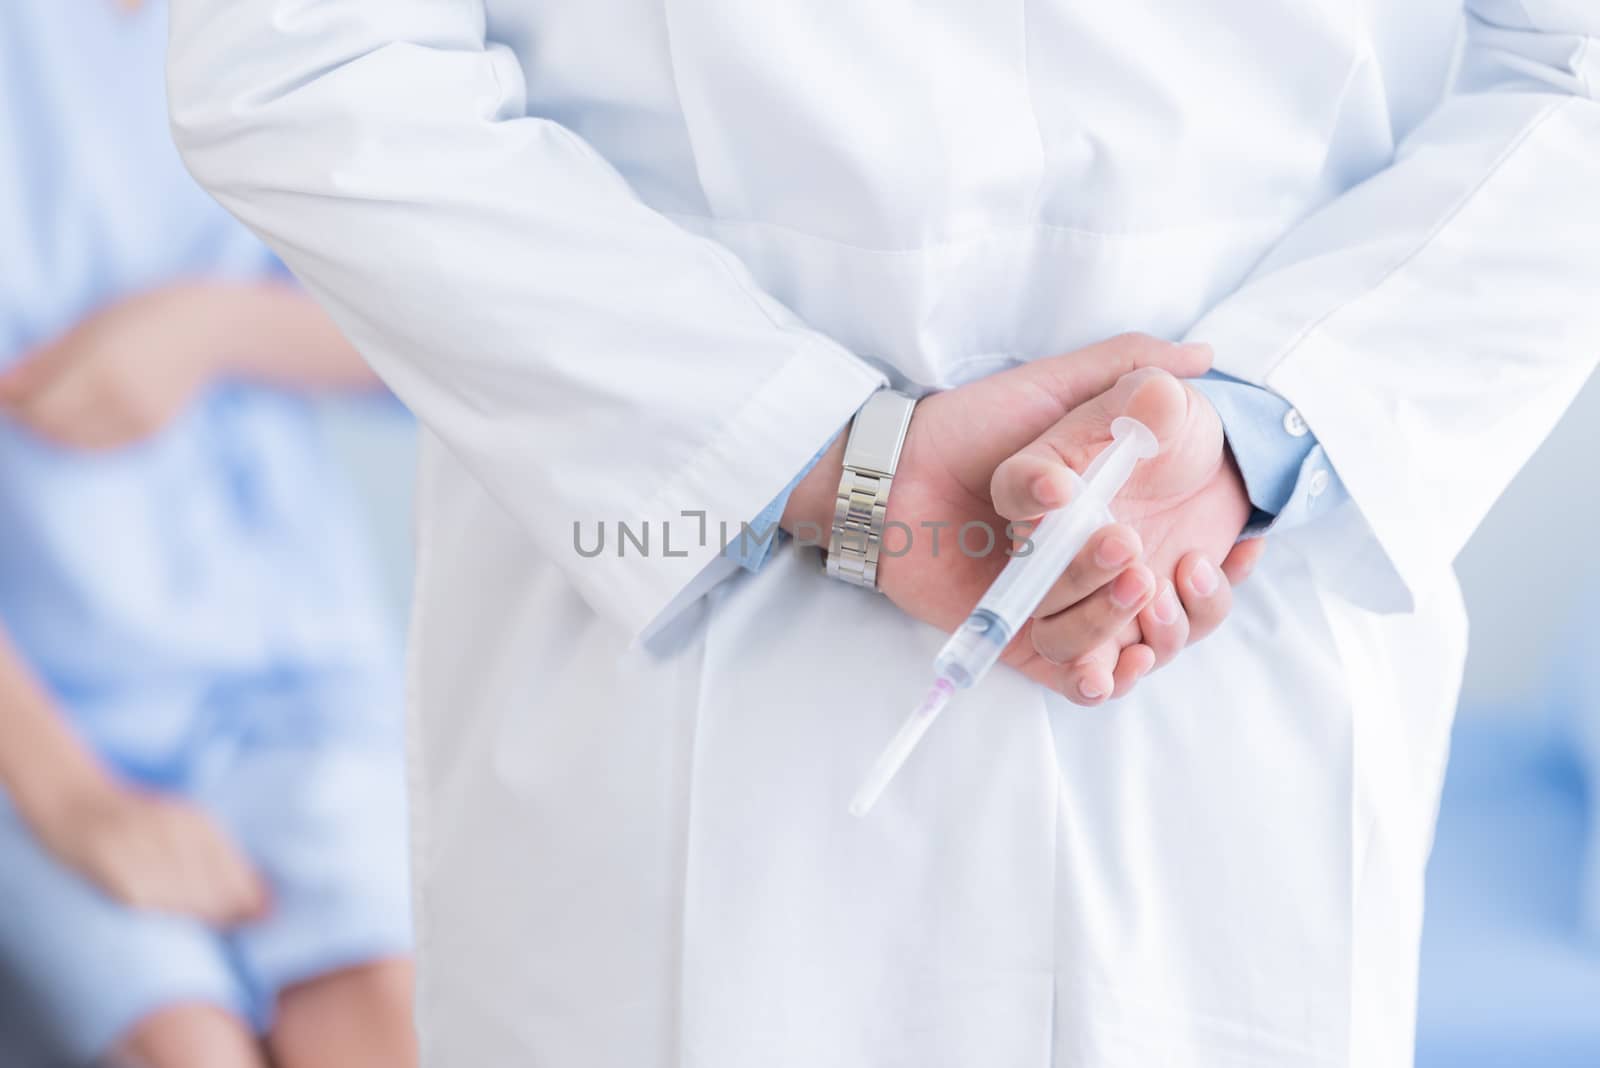 The doctor holding the syringe behind his back and waiting for checking the patient.